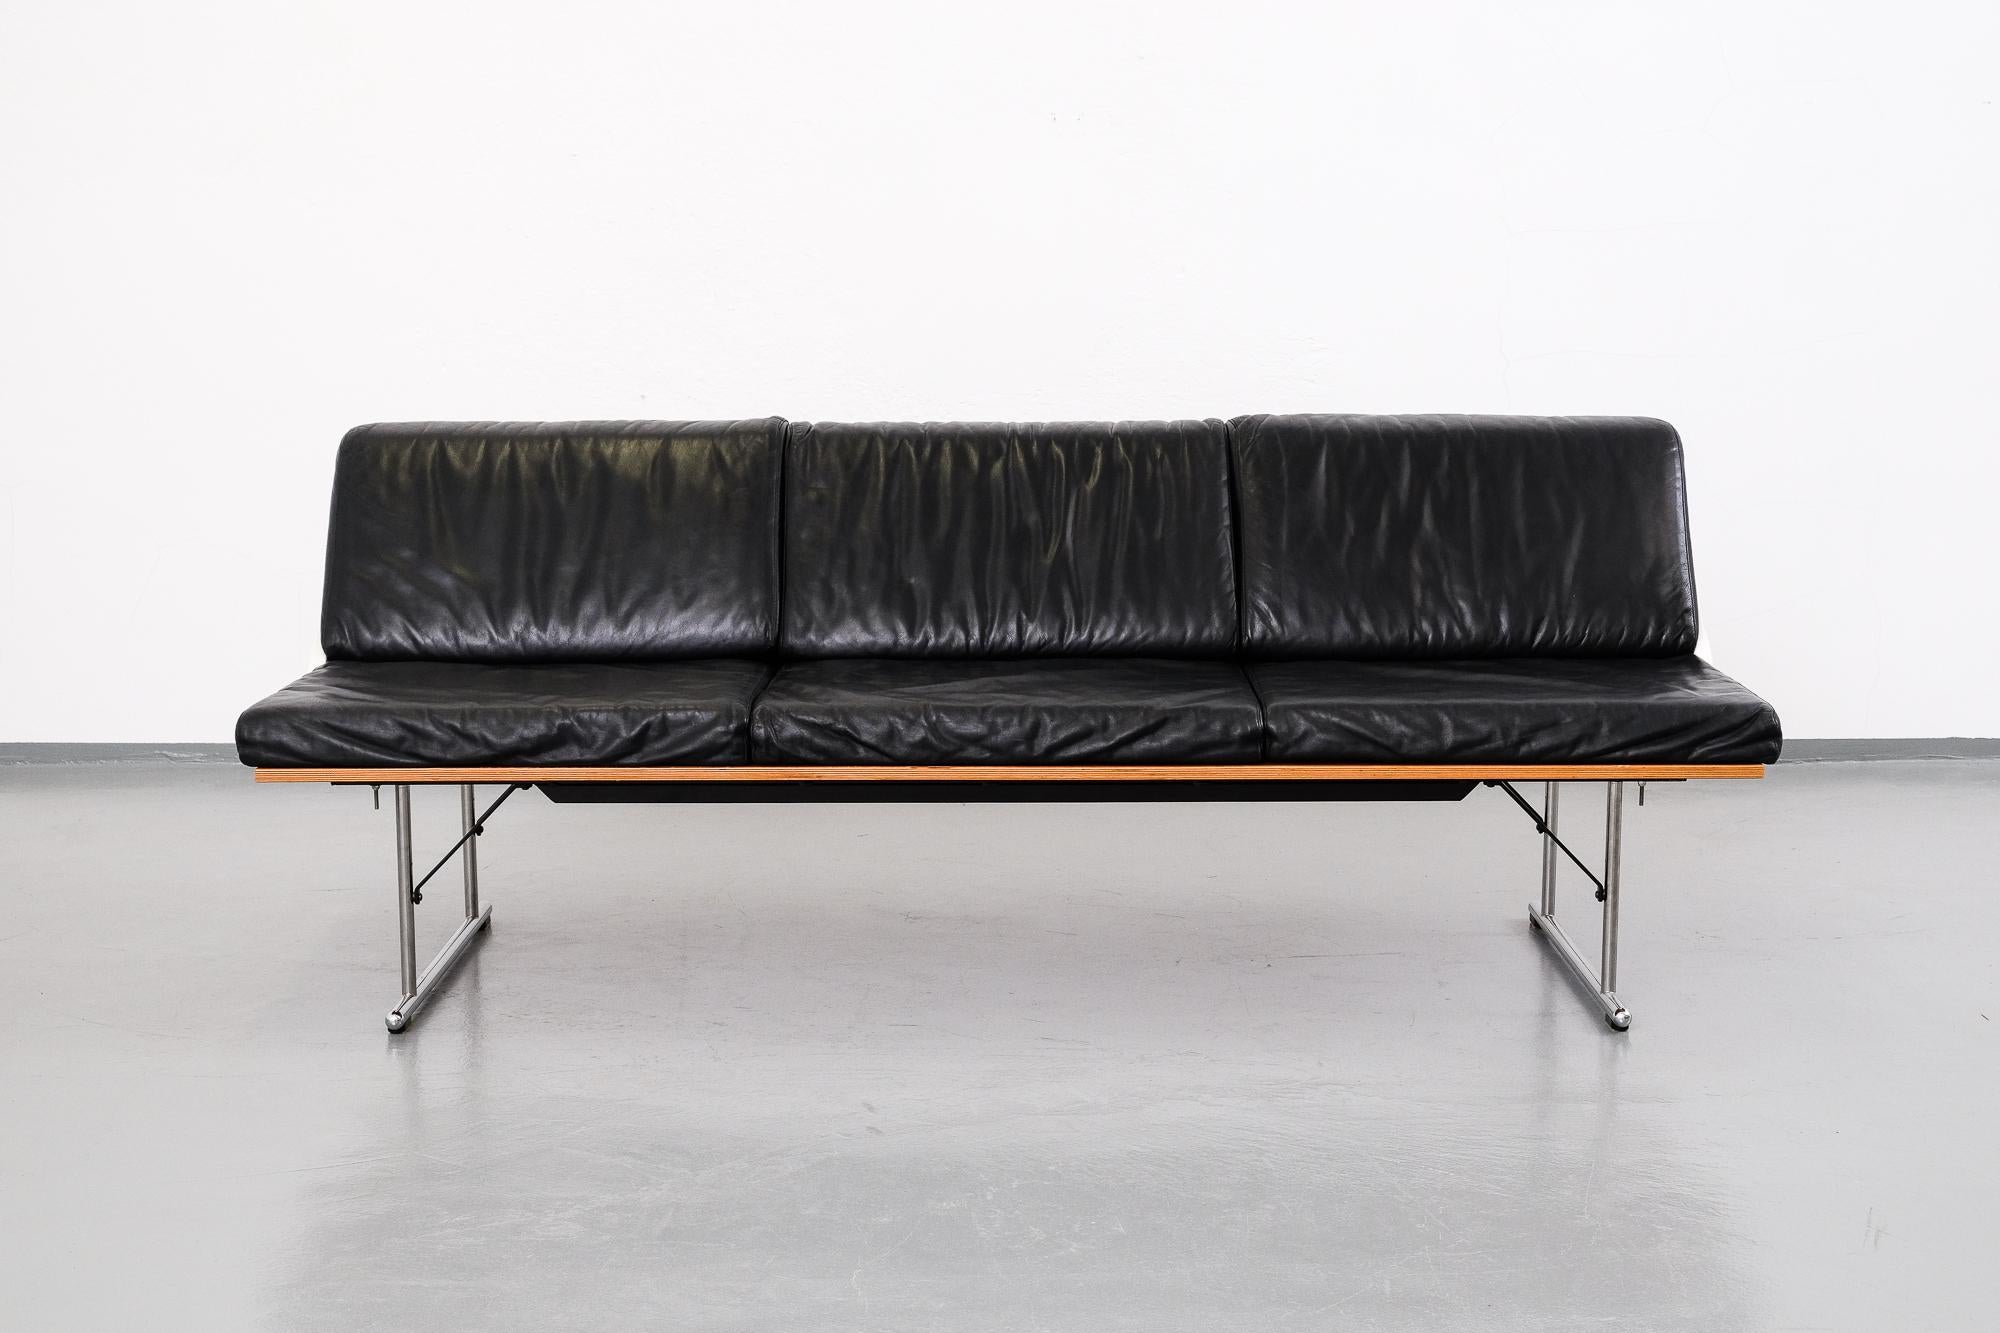 This 'Experiment' series 3-seat sofa was designed by Yrjö Kukkapuro in 1982 for Avarte in Finland. It is made from chromed tubular steel frame, clear lacquered plywood seat and black leather upholstery, the armrest are made of white lacquered curved